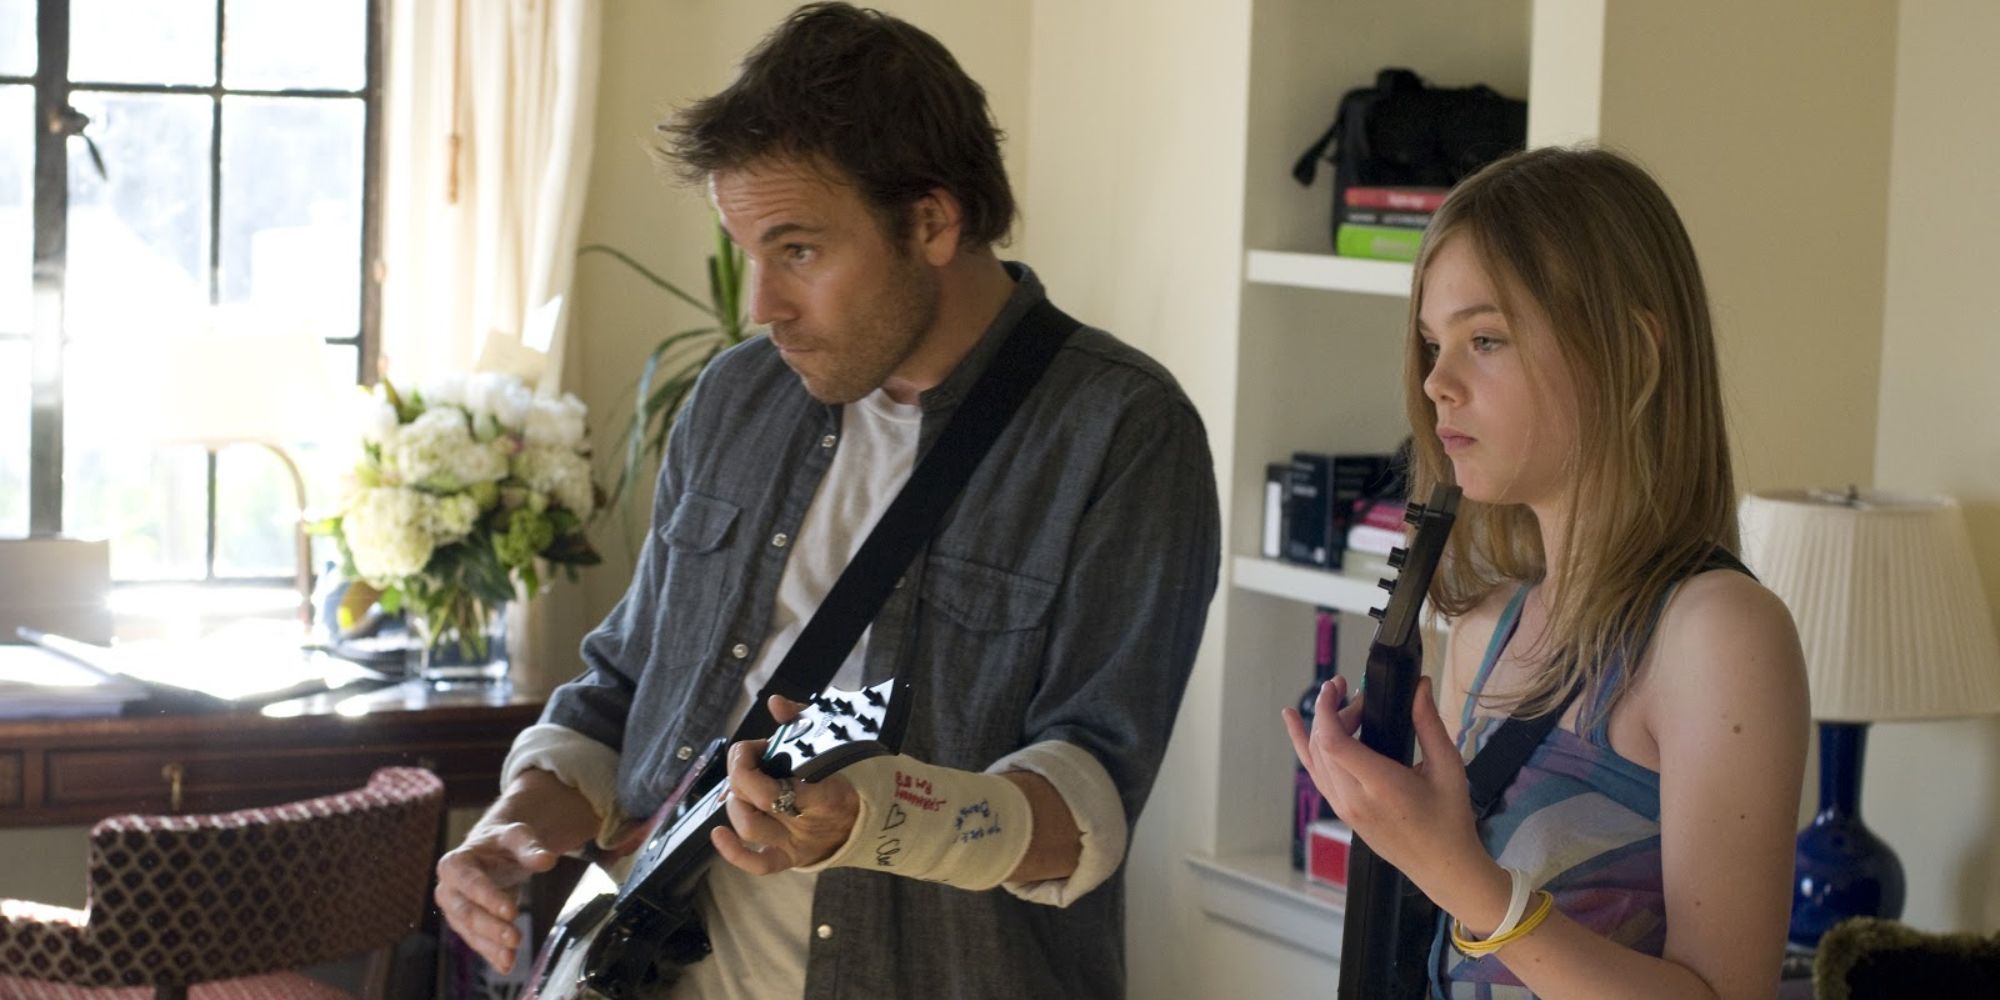 Elle Fanning and Stephen Dorff in Somewhere